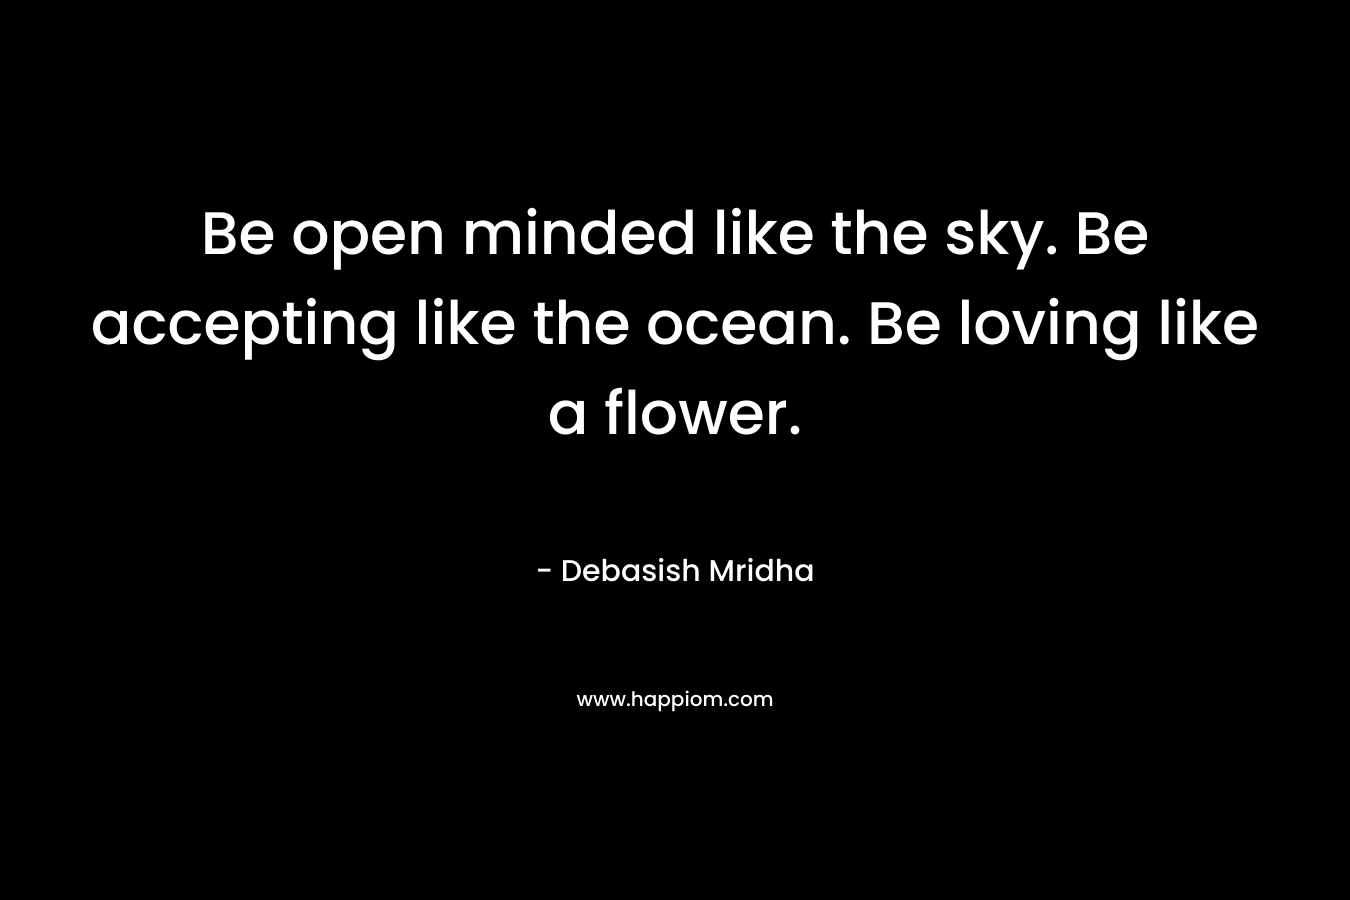 Be open minded like the sky. Be accepting like the ocean. Be loving like a flower. – Debasish Mridha